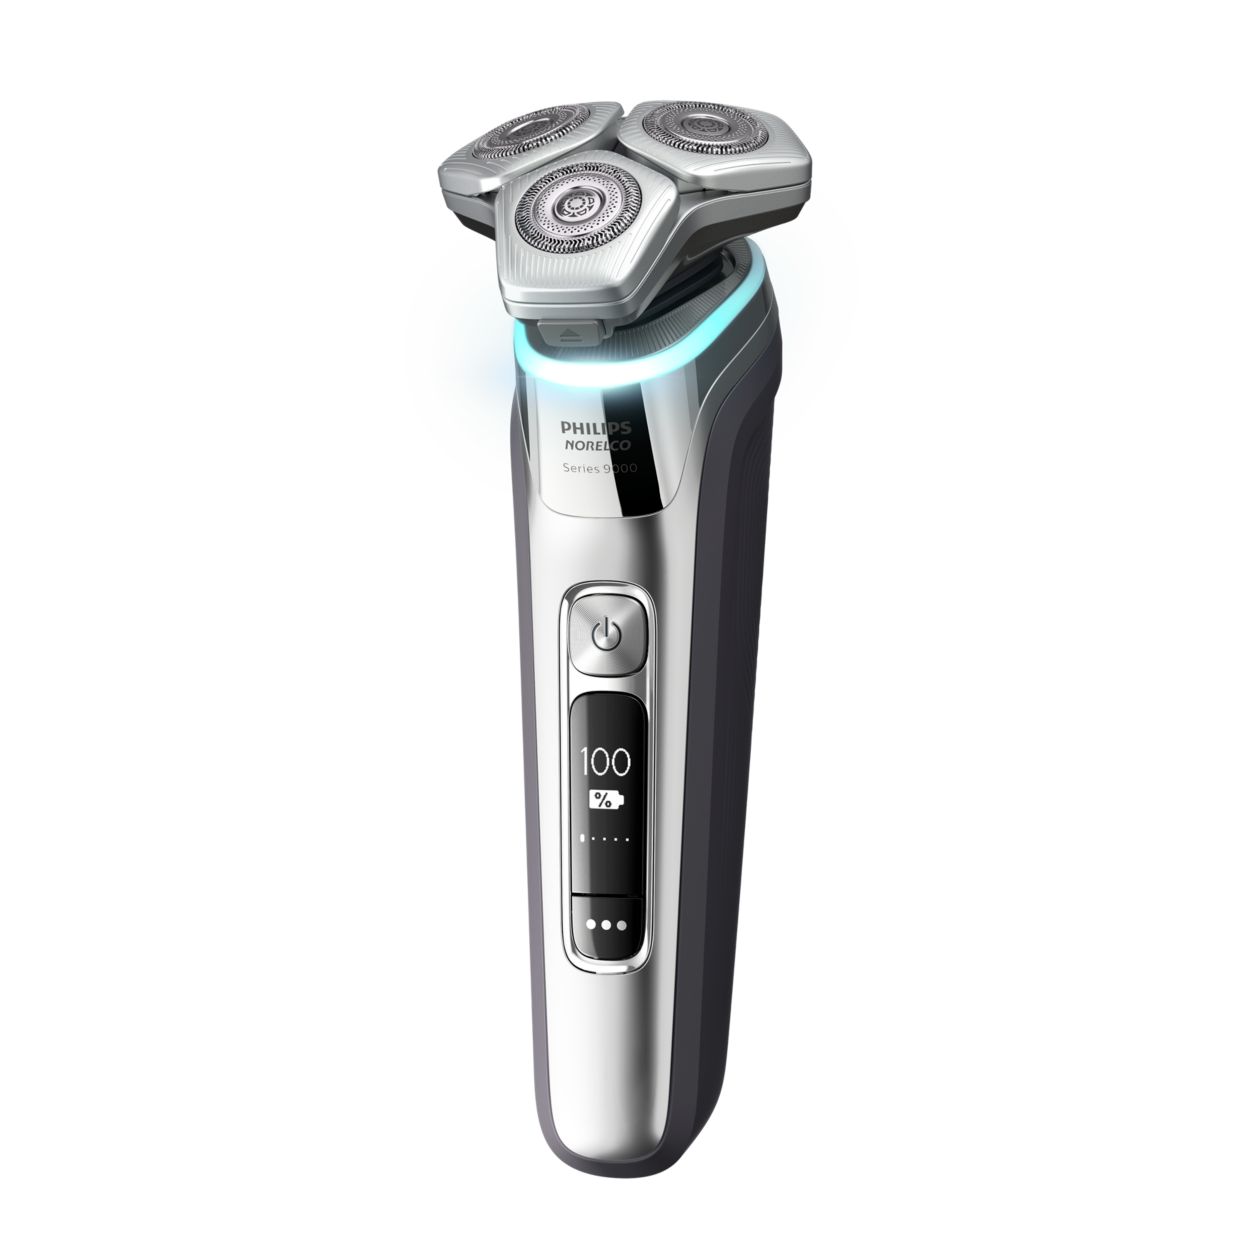 Philips Norelco Shaver Shaver Wet Series Dry 9000 Electric 